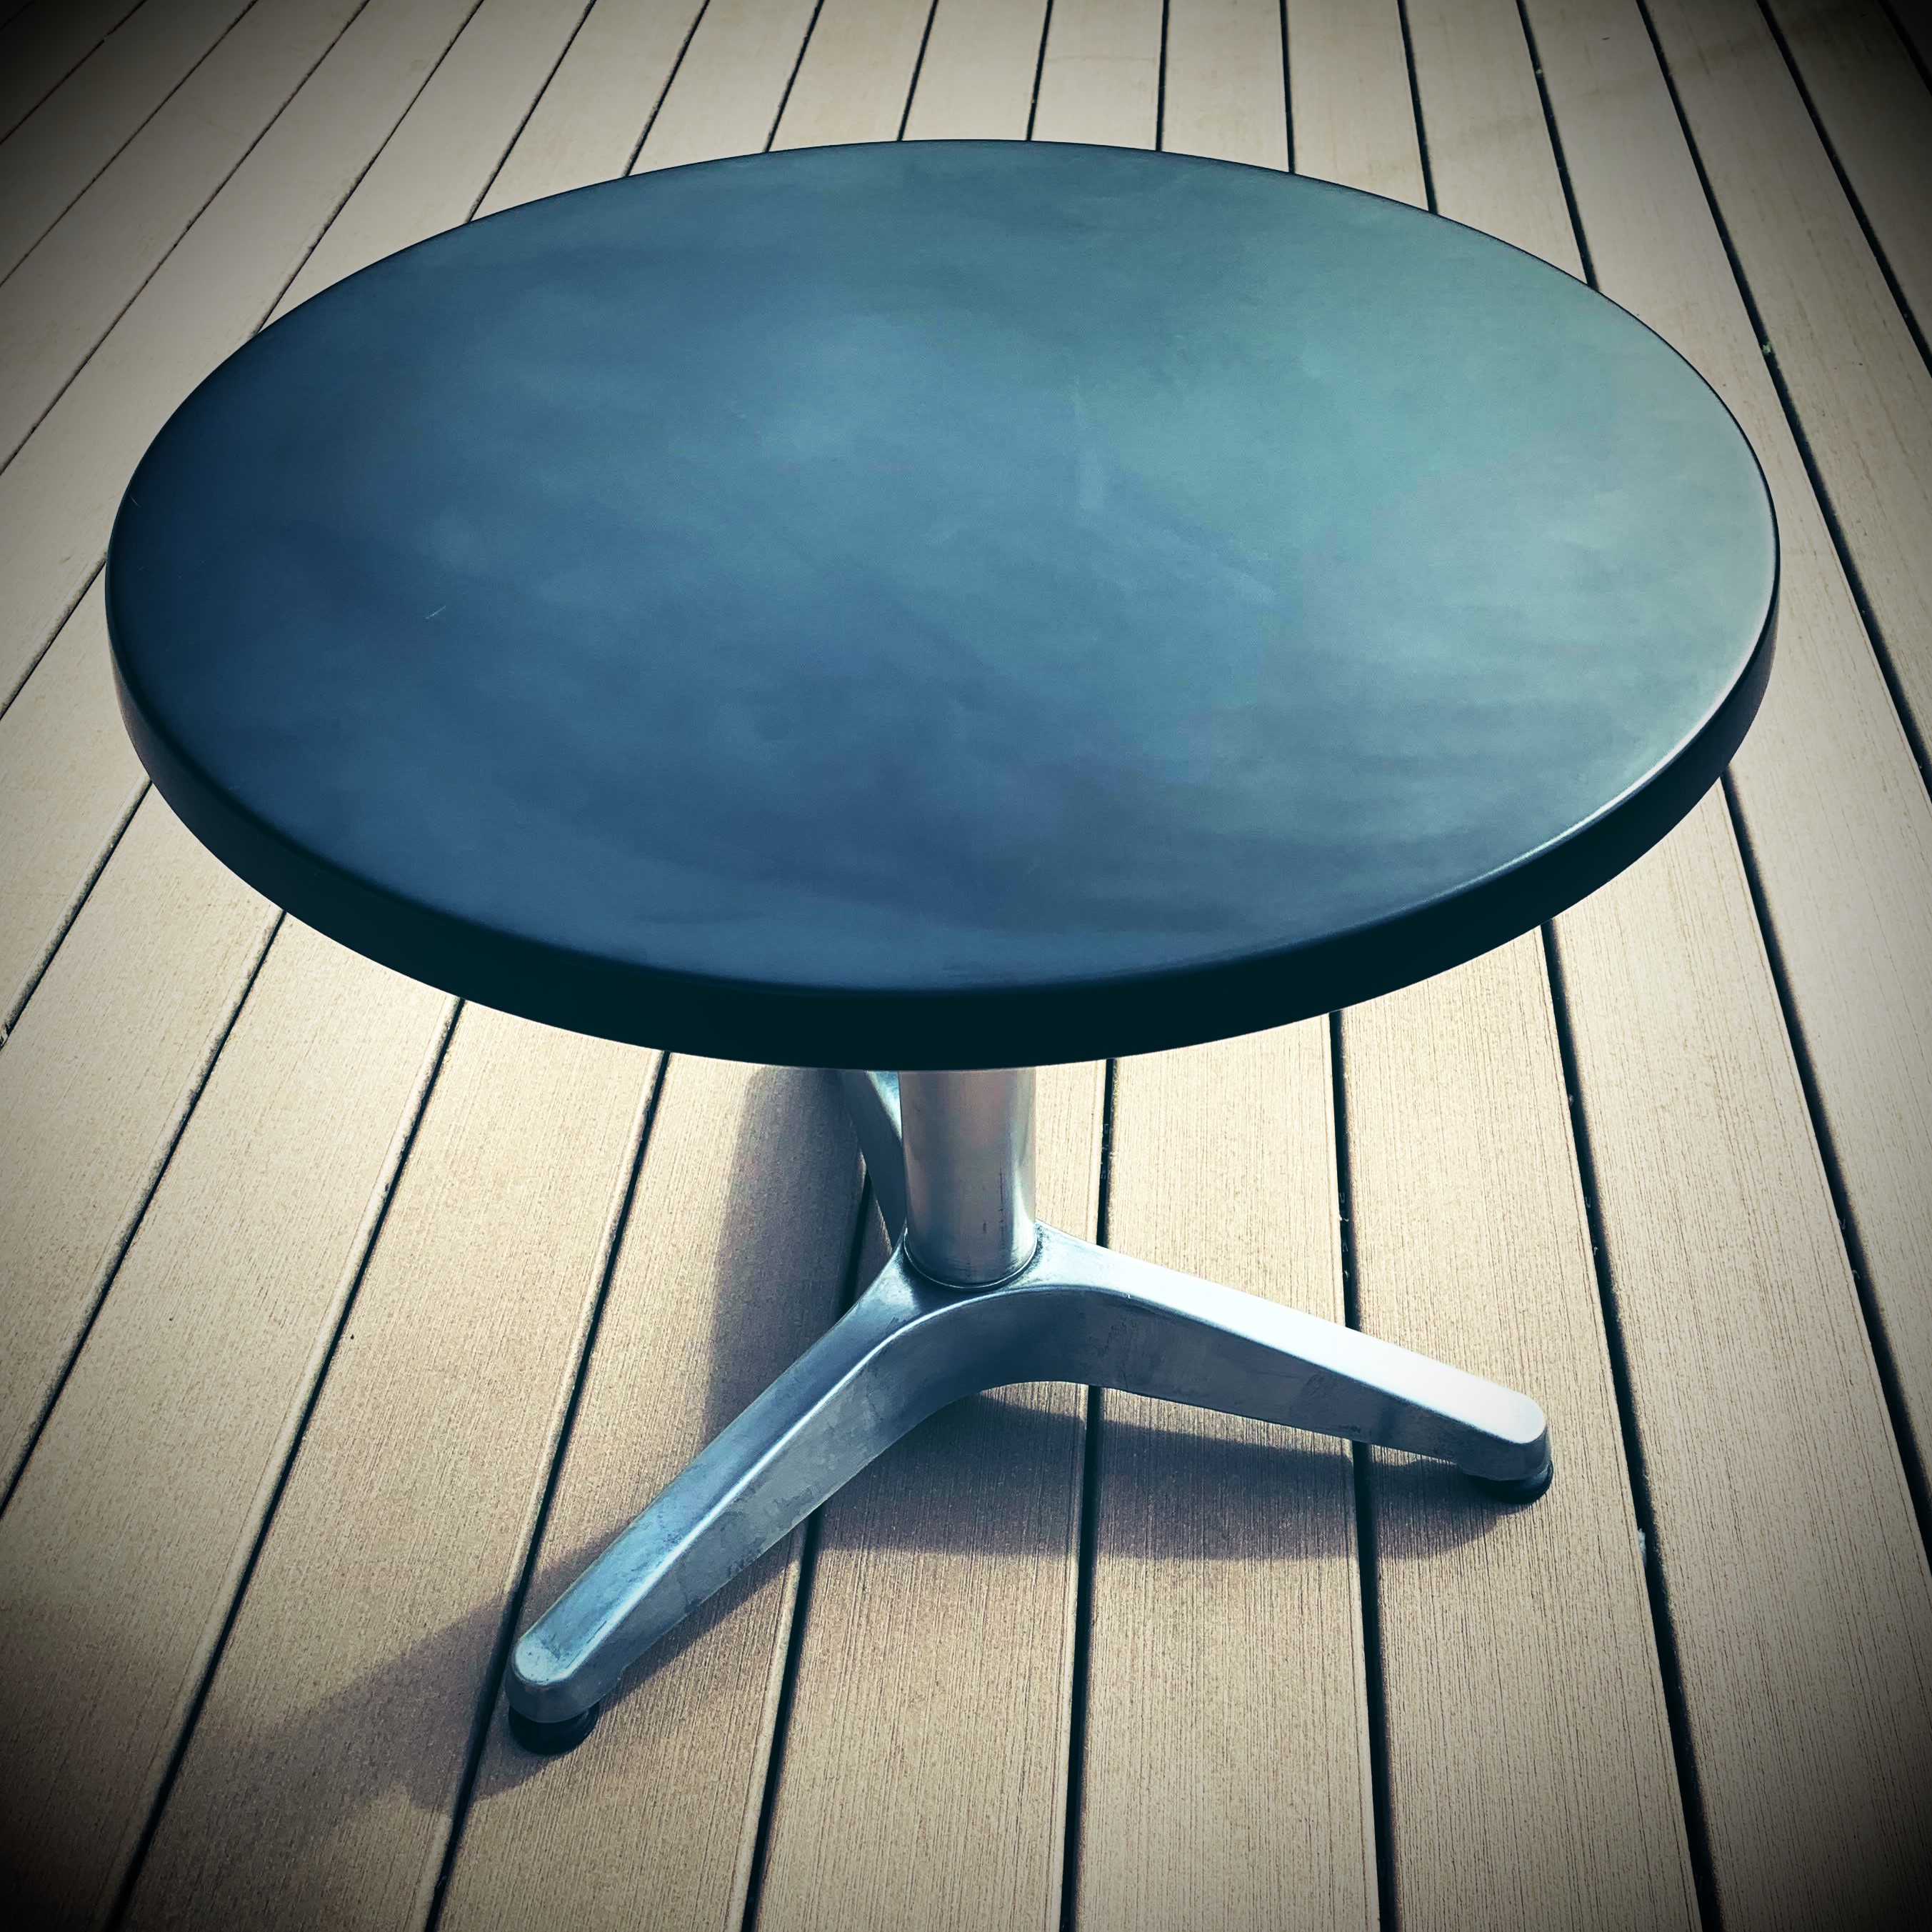 PREMIUM ROUND CAFE OR COFFEE TABLE